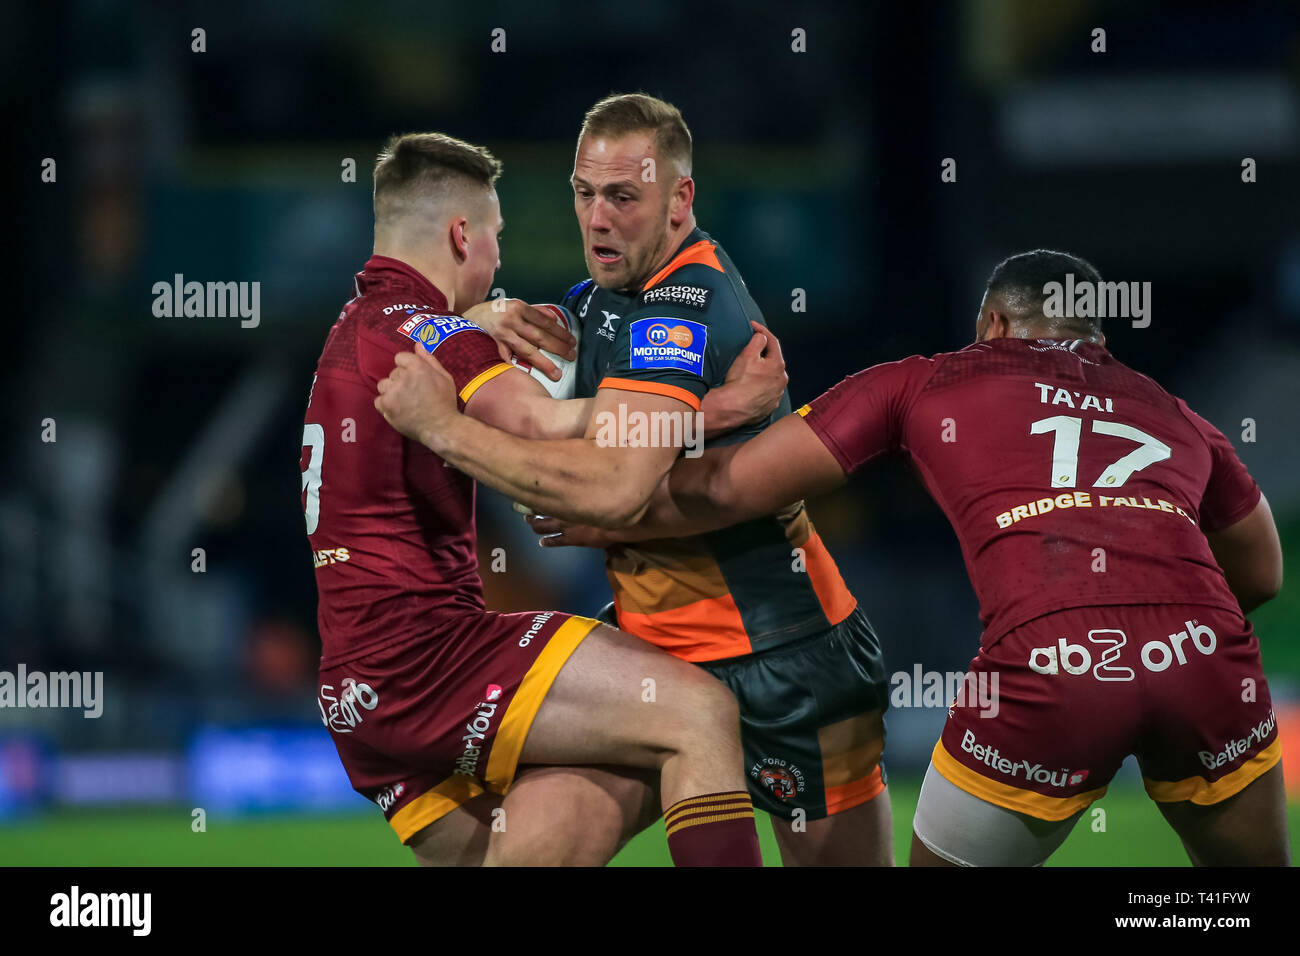 11th April 2019 , John Smiths Stadium, Huddersfield, England; Betfred Super League, Round 10, Huddersfield Giants vs Castleford Tigers ;   Liam Watts of Castleford Tigers  been tackled Credit Craig Milner/News Images Stock Photo